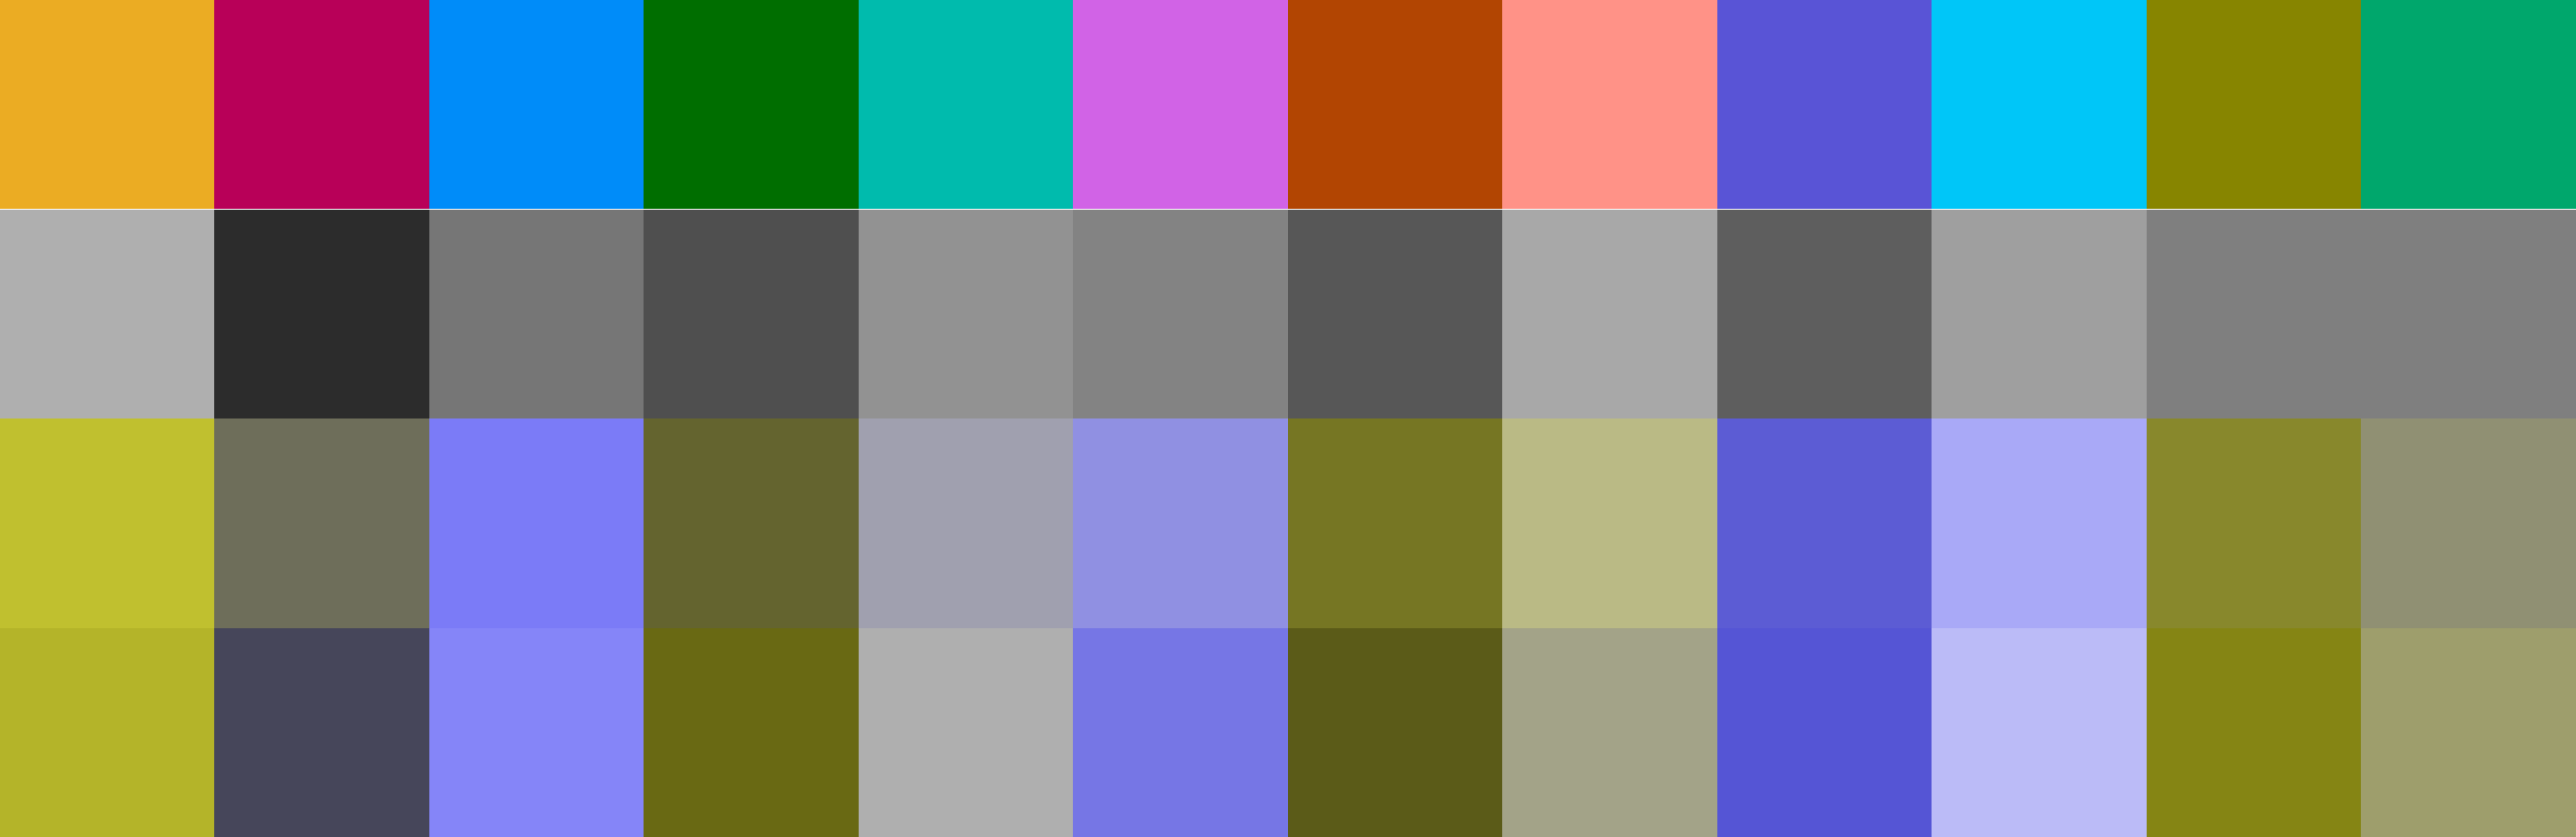 Normal, 12 colors